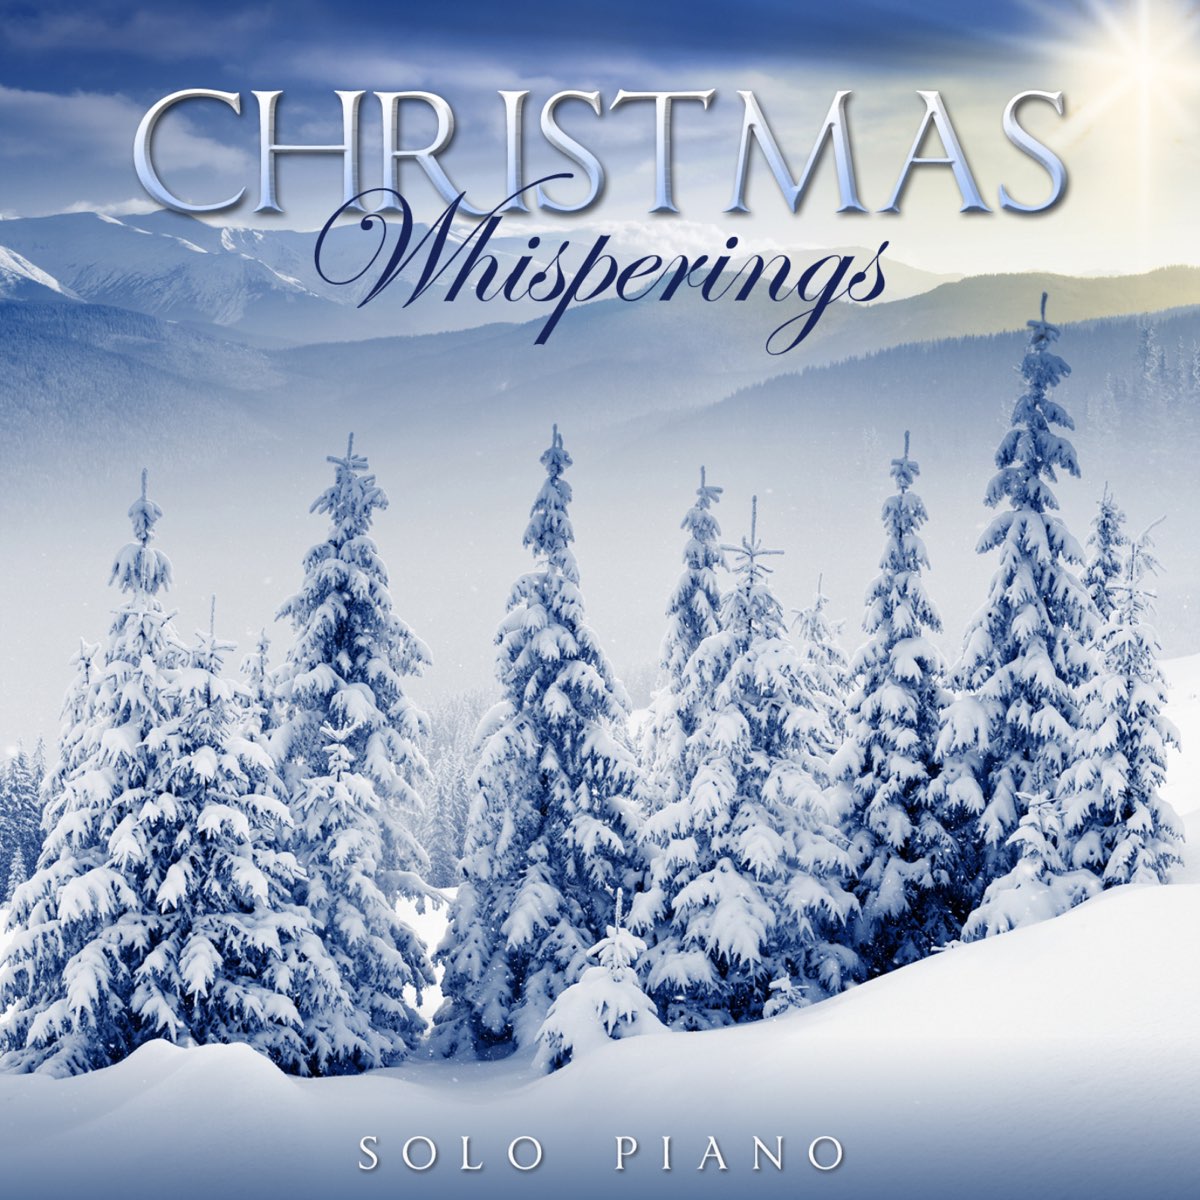 Christmas Whisperings - Solo Piano by Various Artists on Apple Music